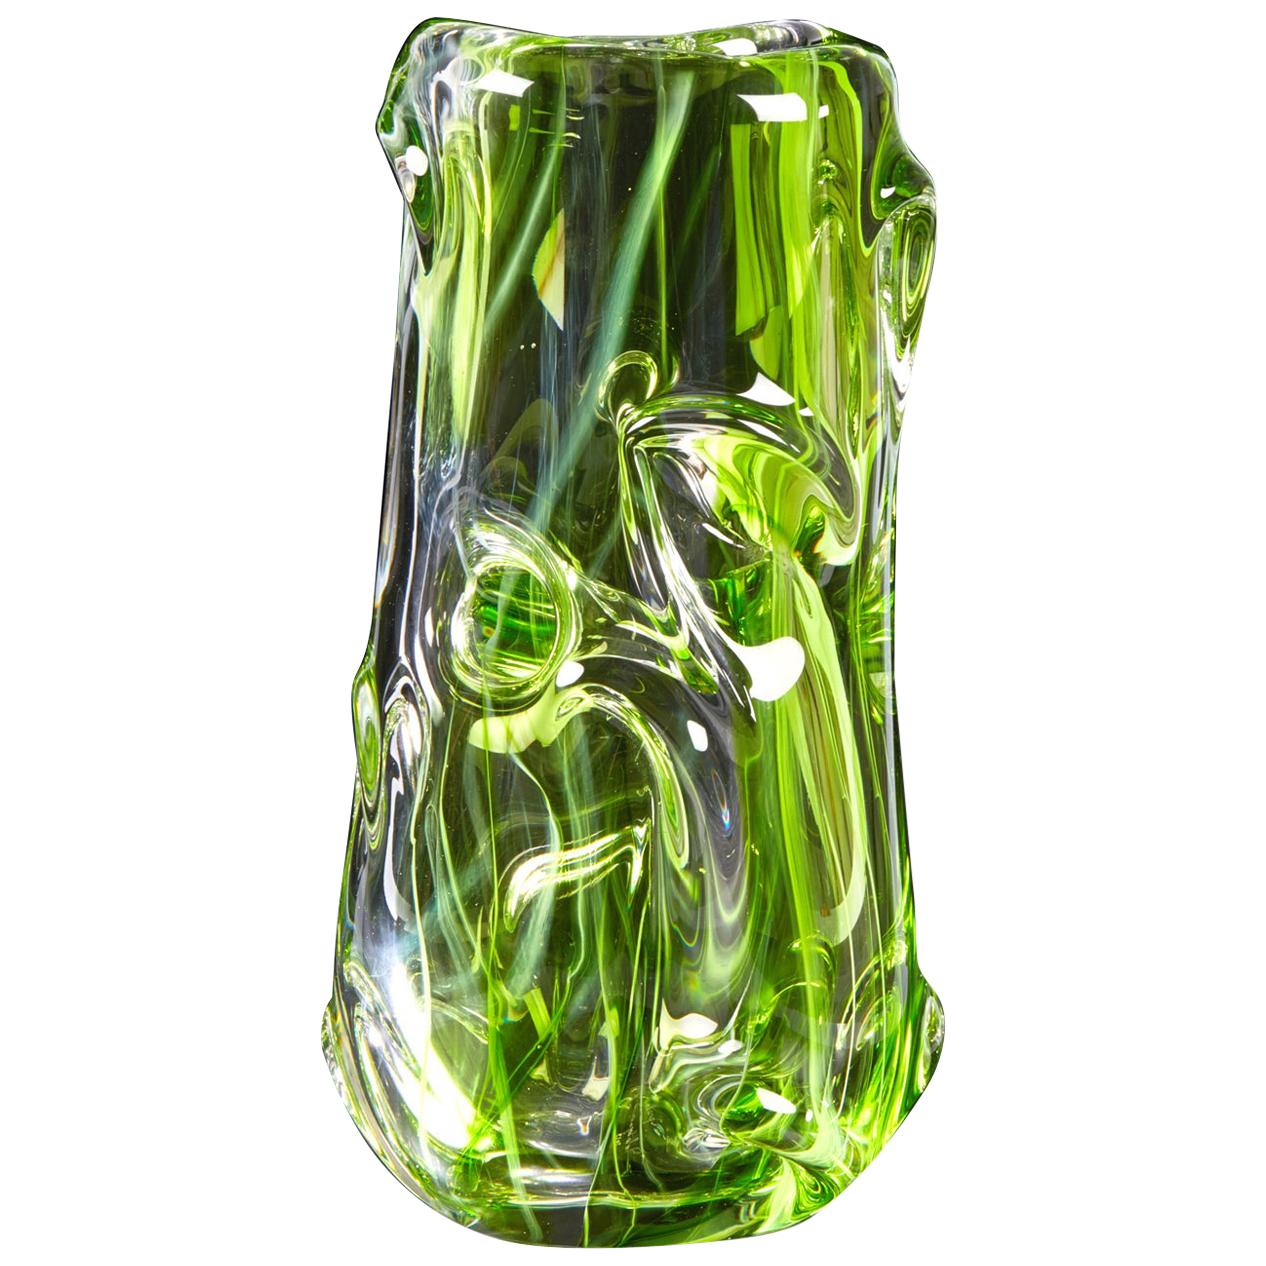 Giampaolo Seguso, "Surprise" Vase, One of a Kind Murano Glass Art Works